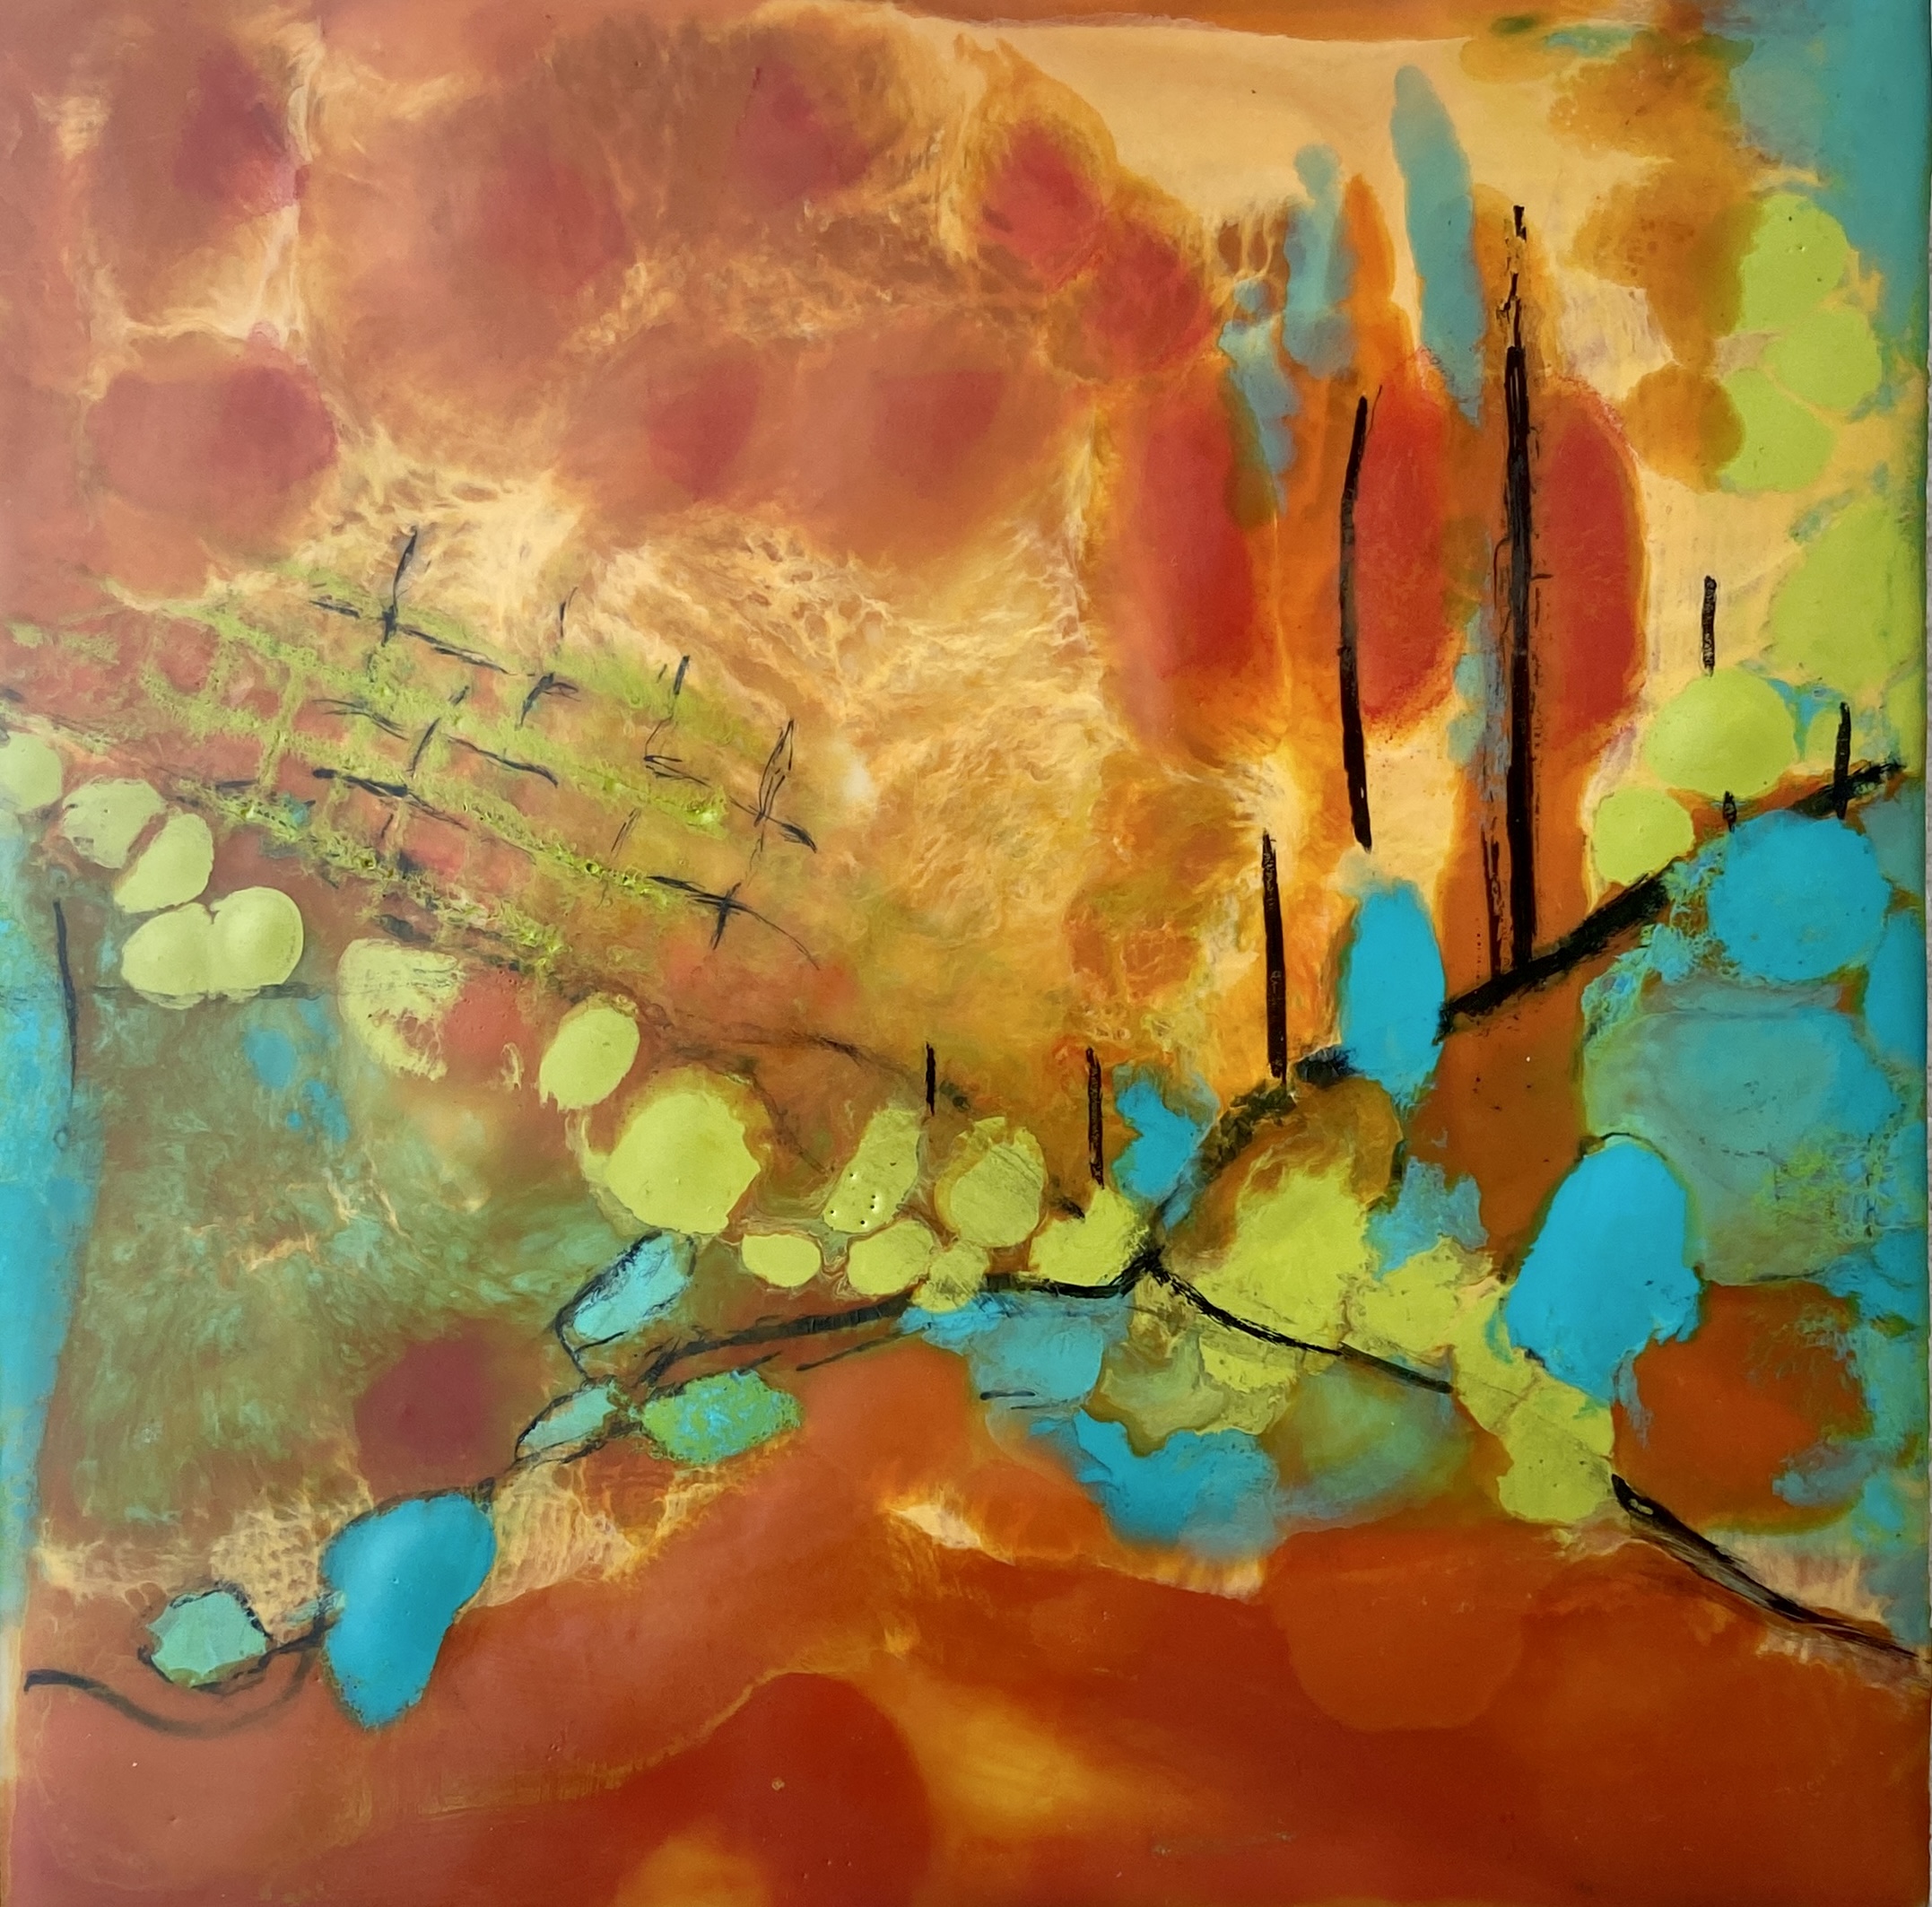 Rusty Teal With Lime
Encaustic on panel
6″ x 6″
$275